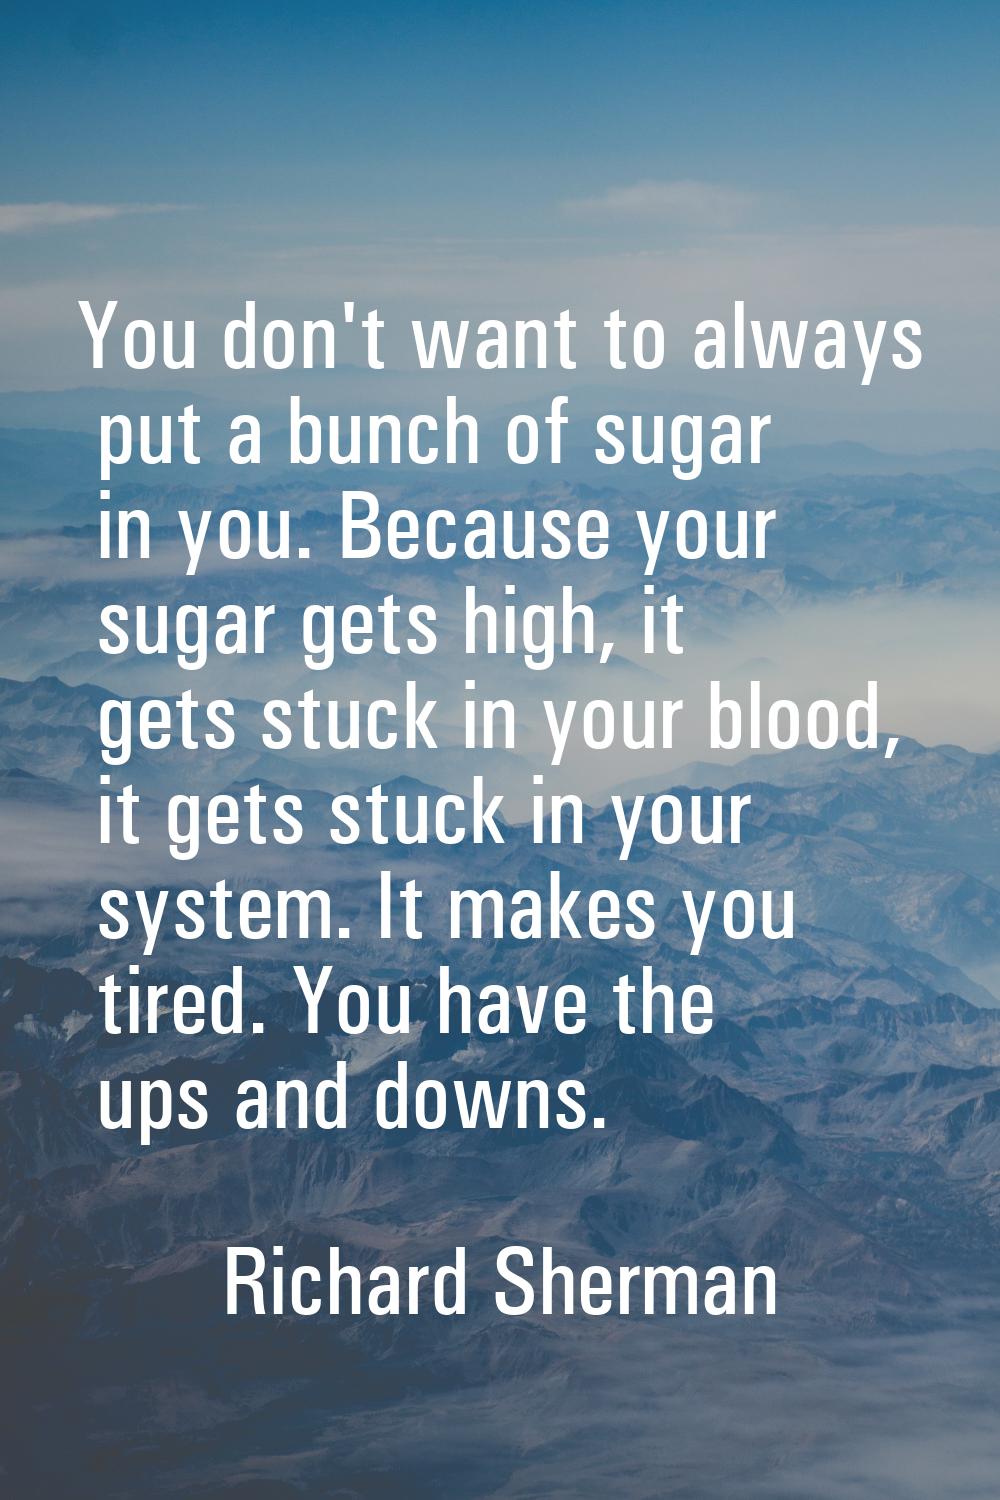 You don't want to always put a bunch of sugar in you. Because your sugar gets high, it gets stuck i